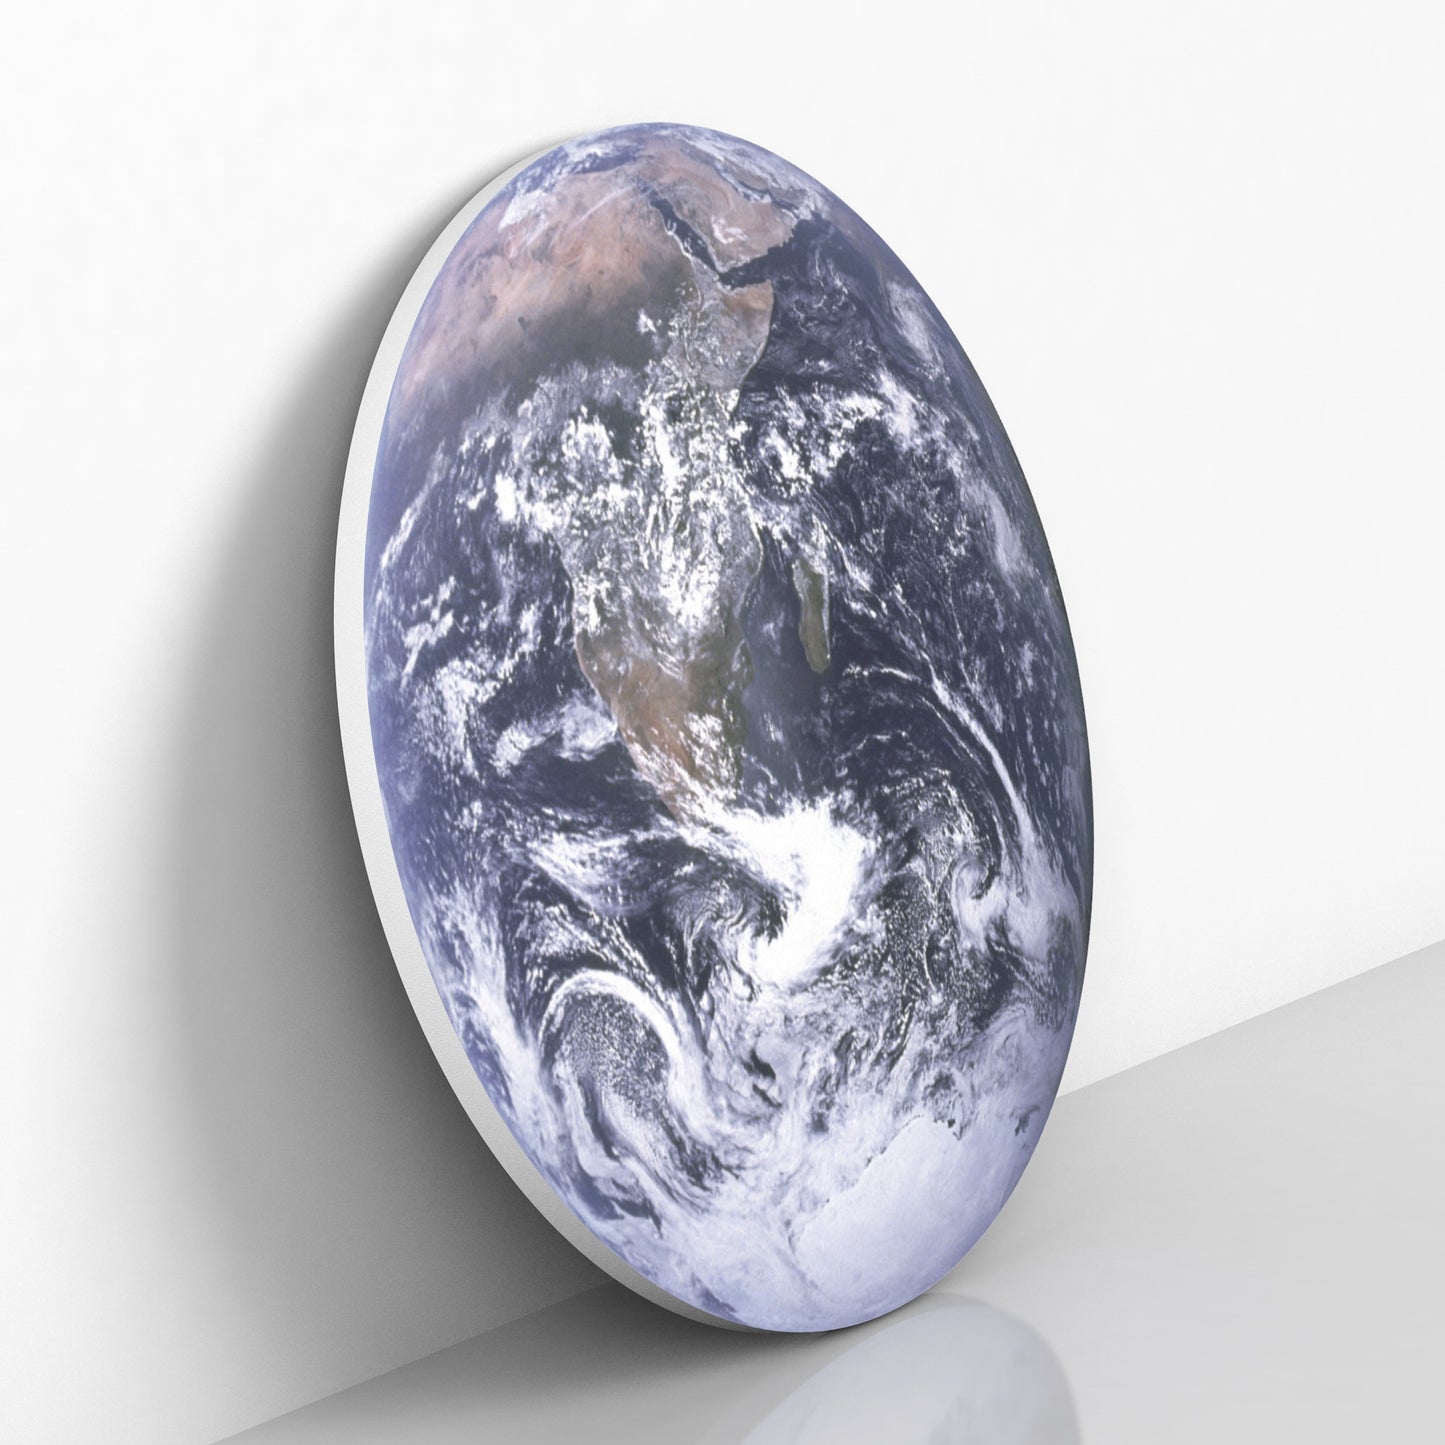 Earth Wall Art - Earth Wall Hanging Decor - Space Decor for Bedroom - Planet Theme Room